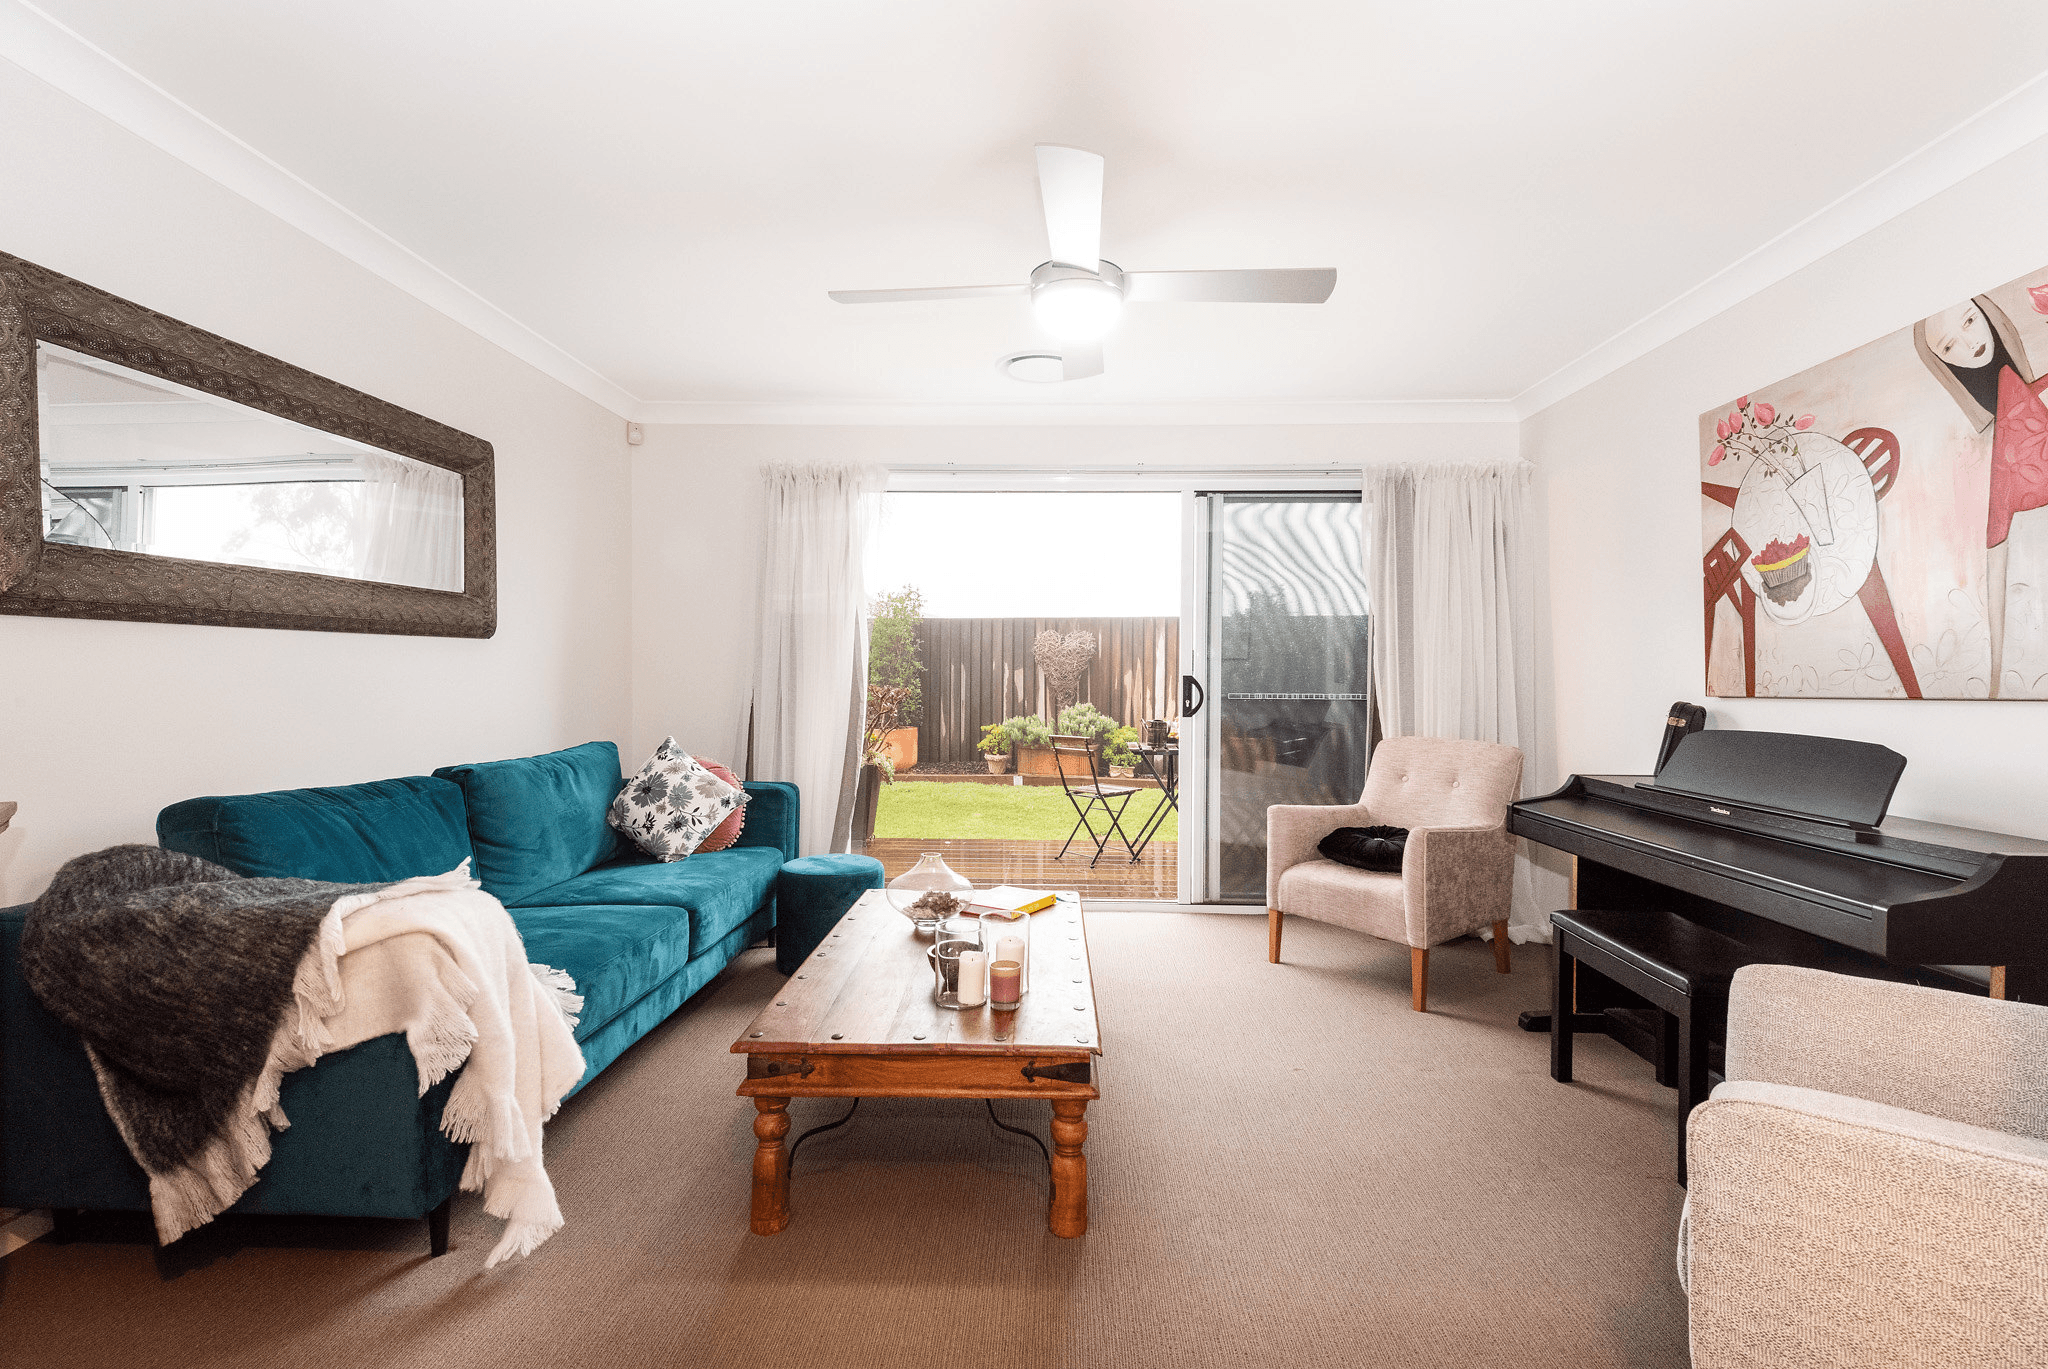 4 Highview Ct, Prince Henry Heights, QLD 4350